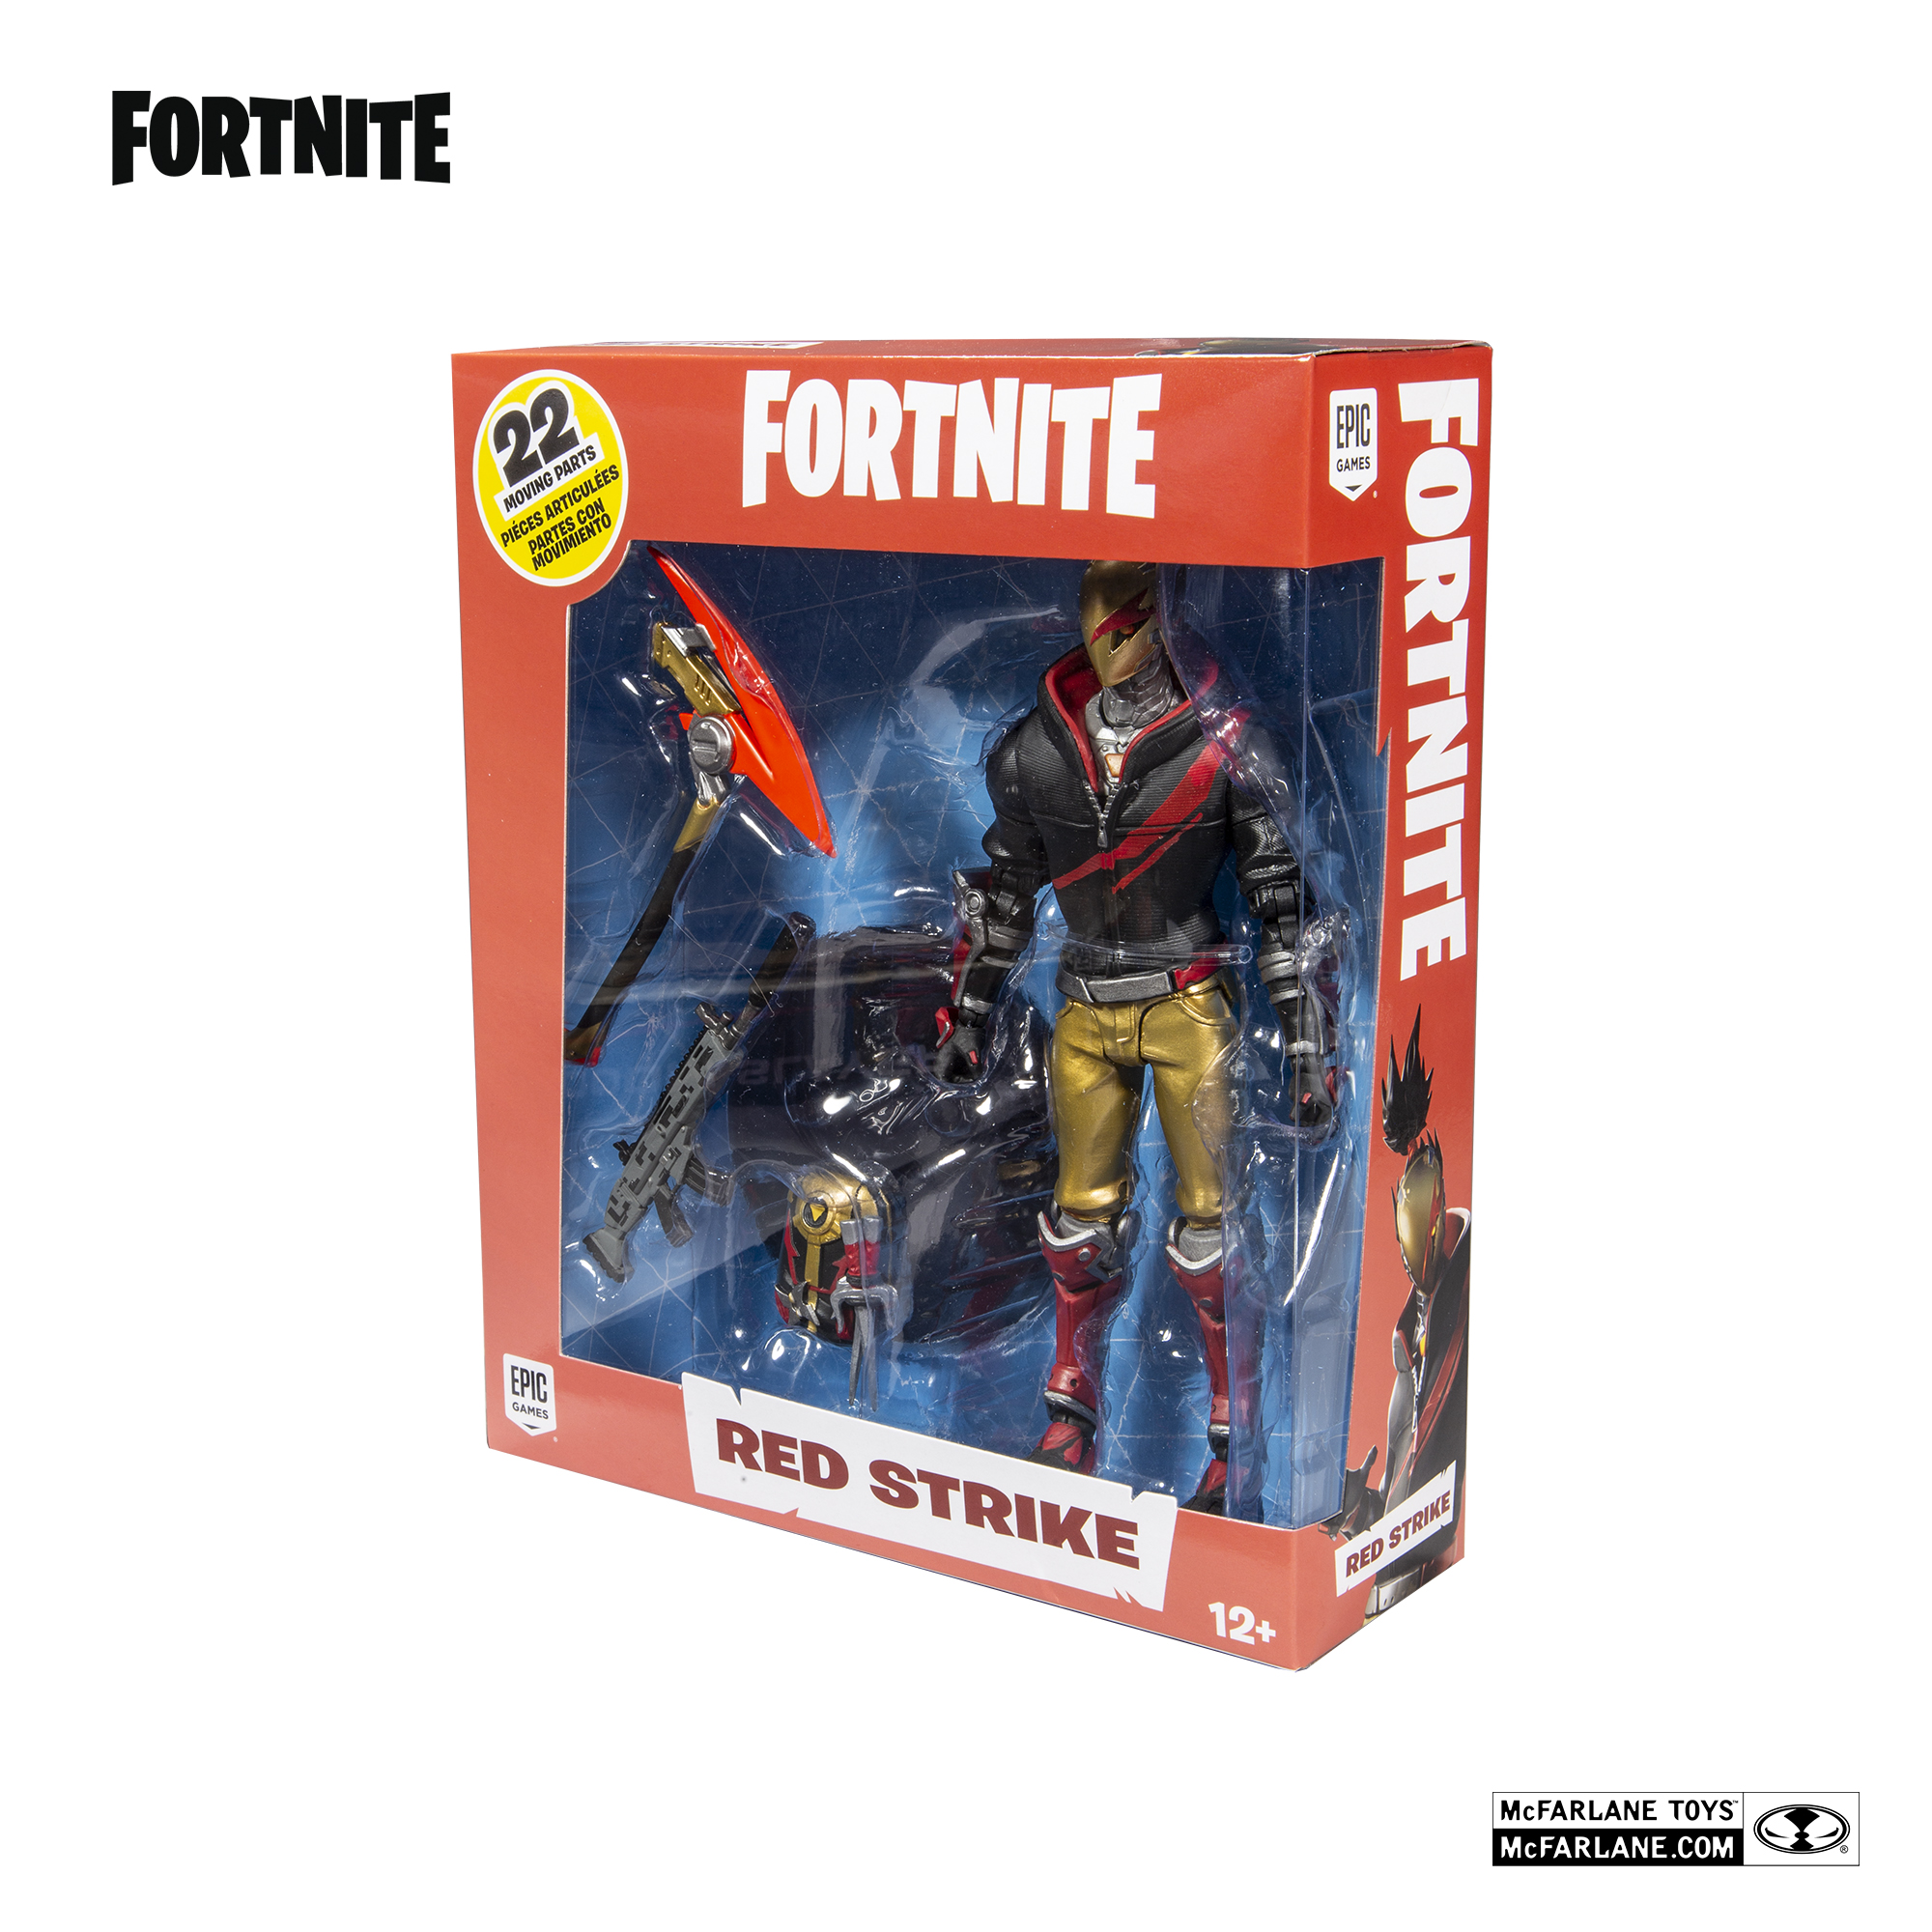 Fortnite Red Strike Action Figure Epic Games McFarlane Toys 22 Moving Parts for sale online 